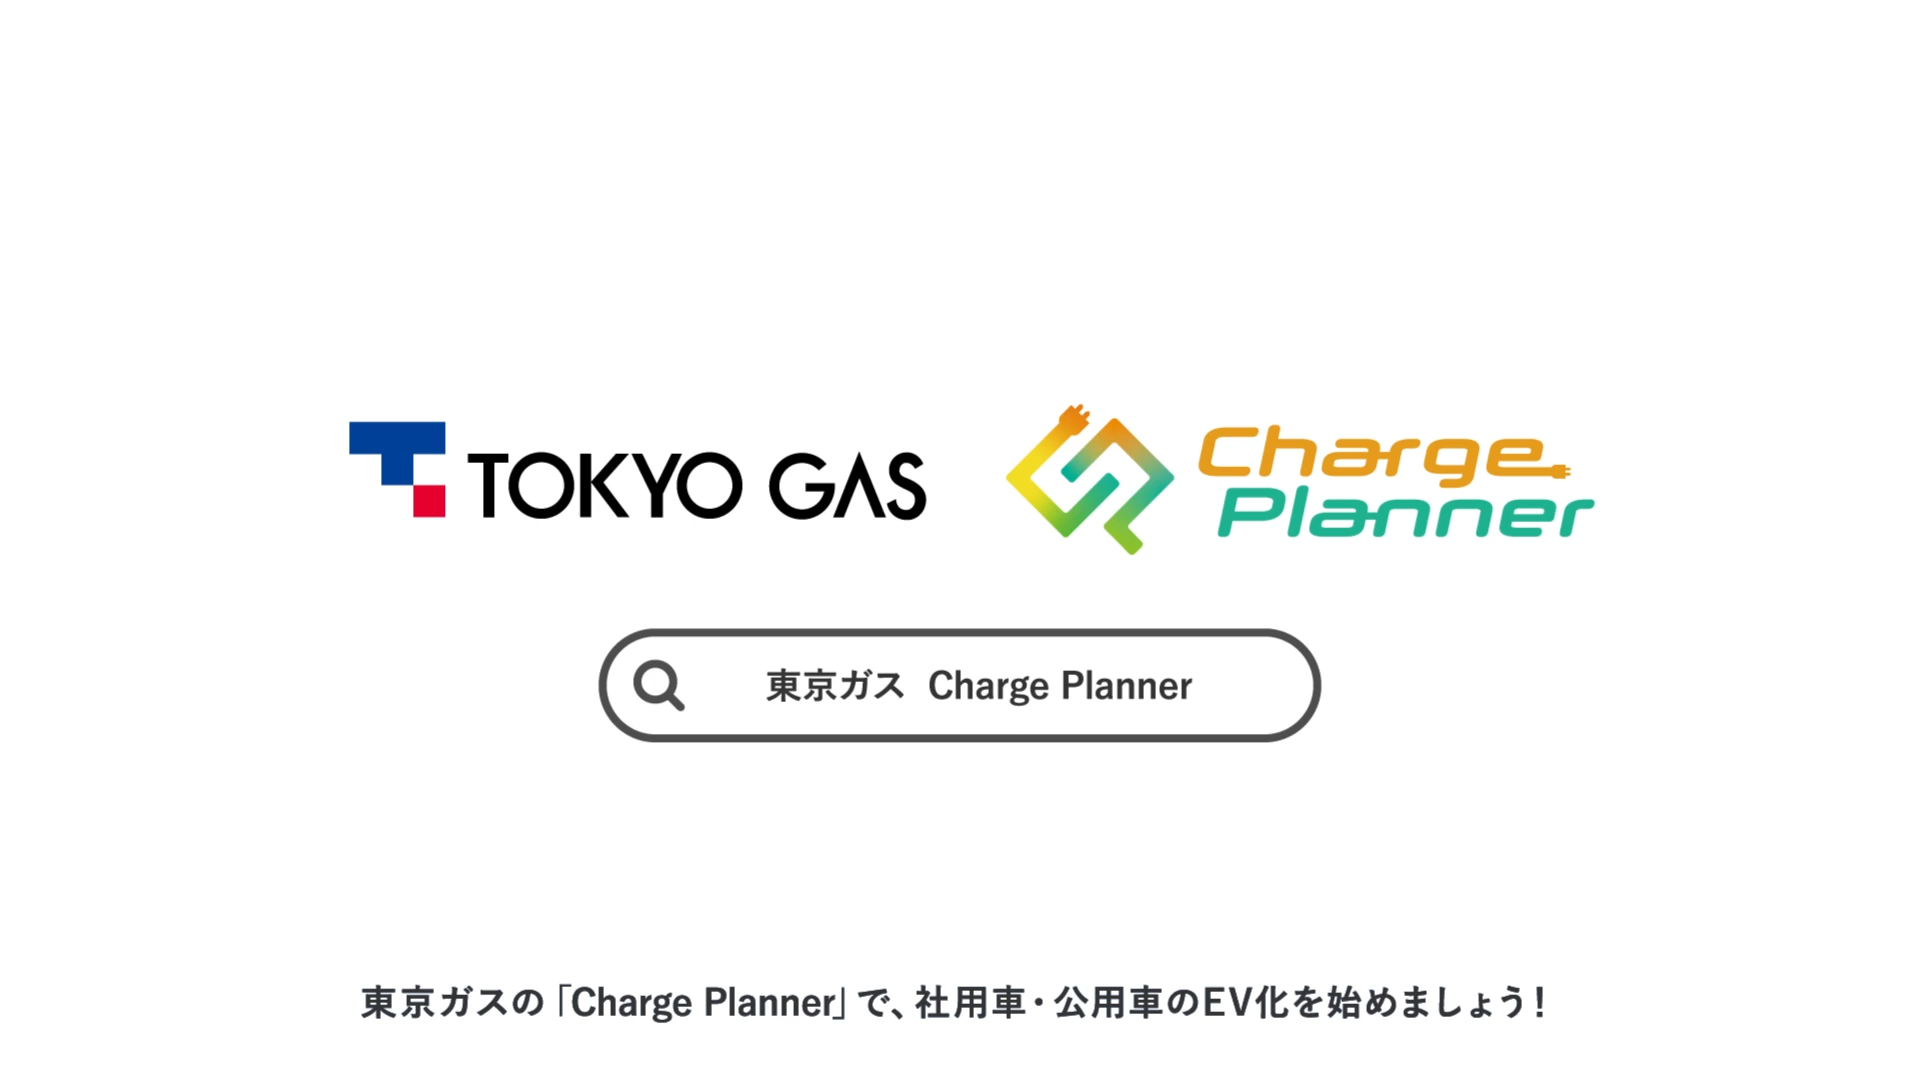 Charge Planner